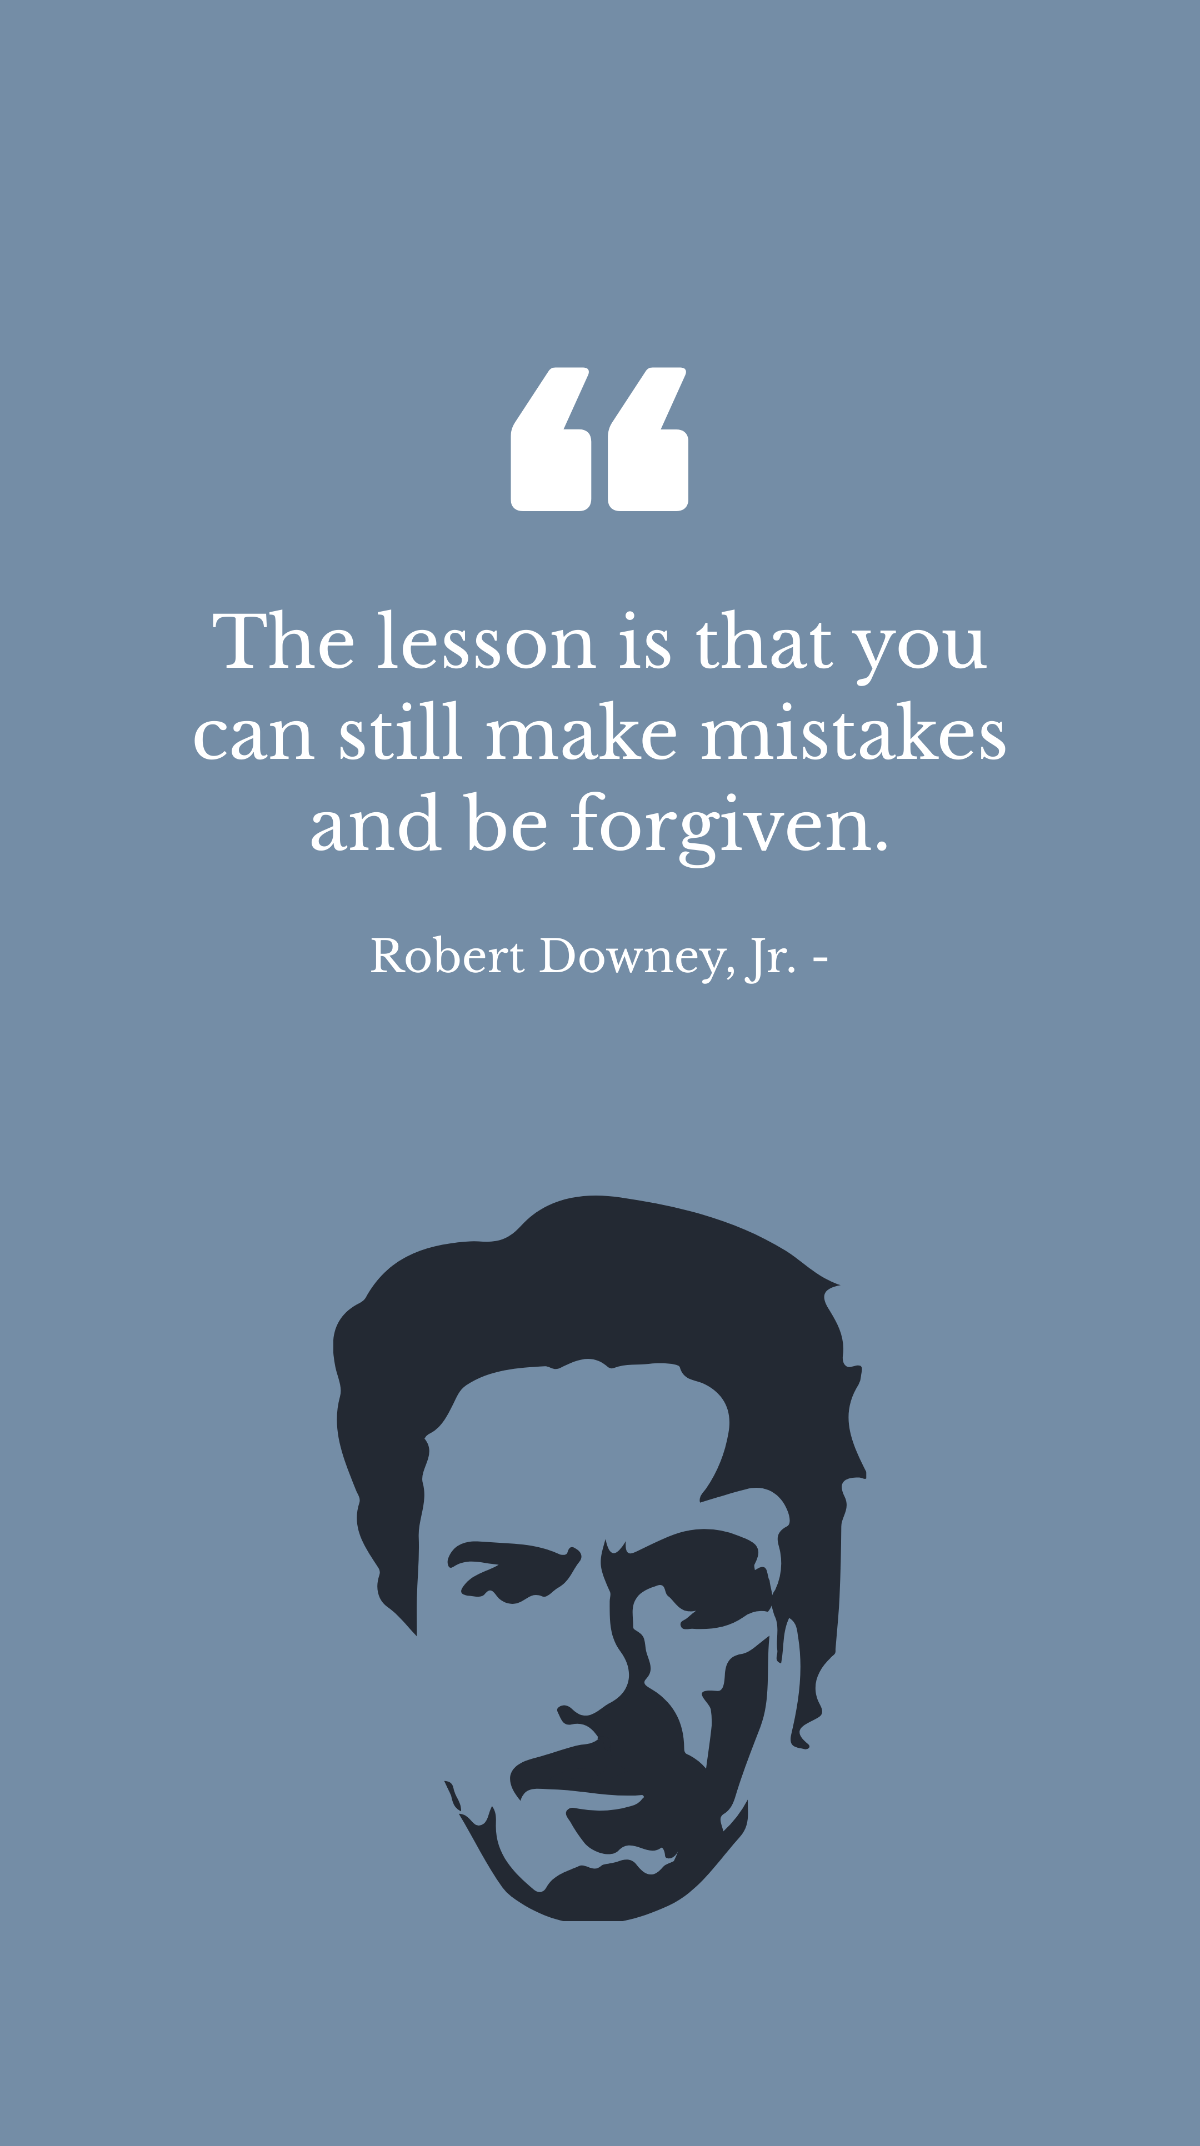 Robert Downey, Jr. - The lesson is that you can still make mistakes and be forgiven.